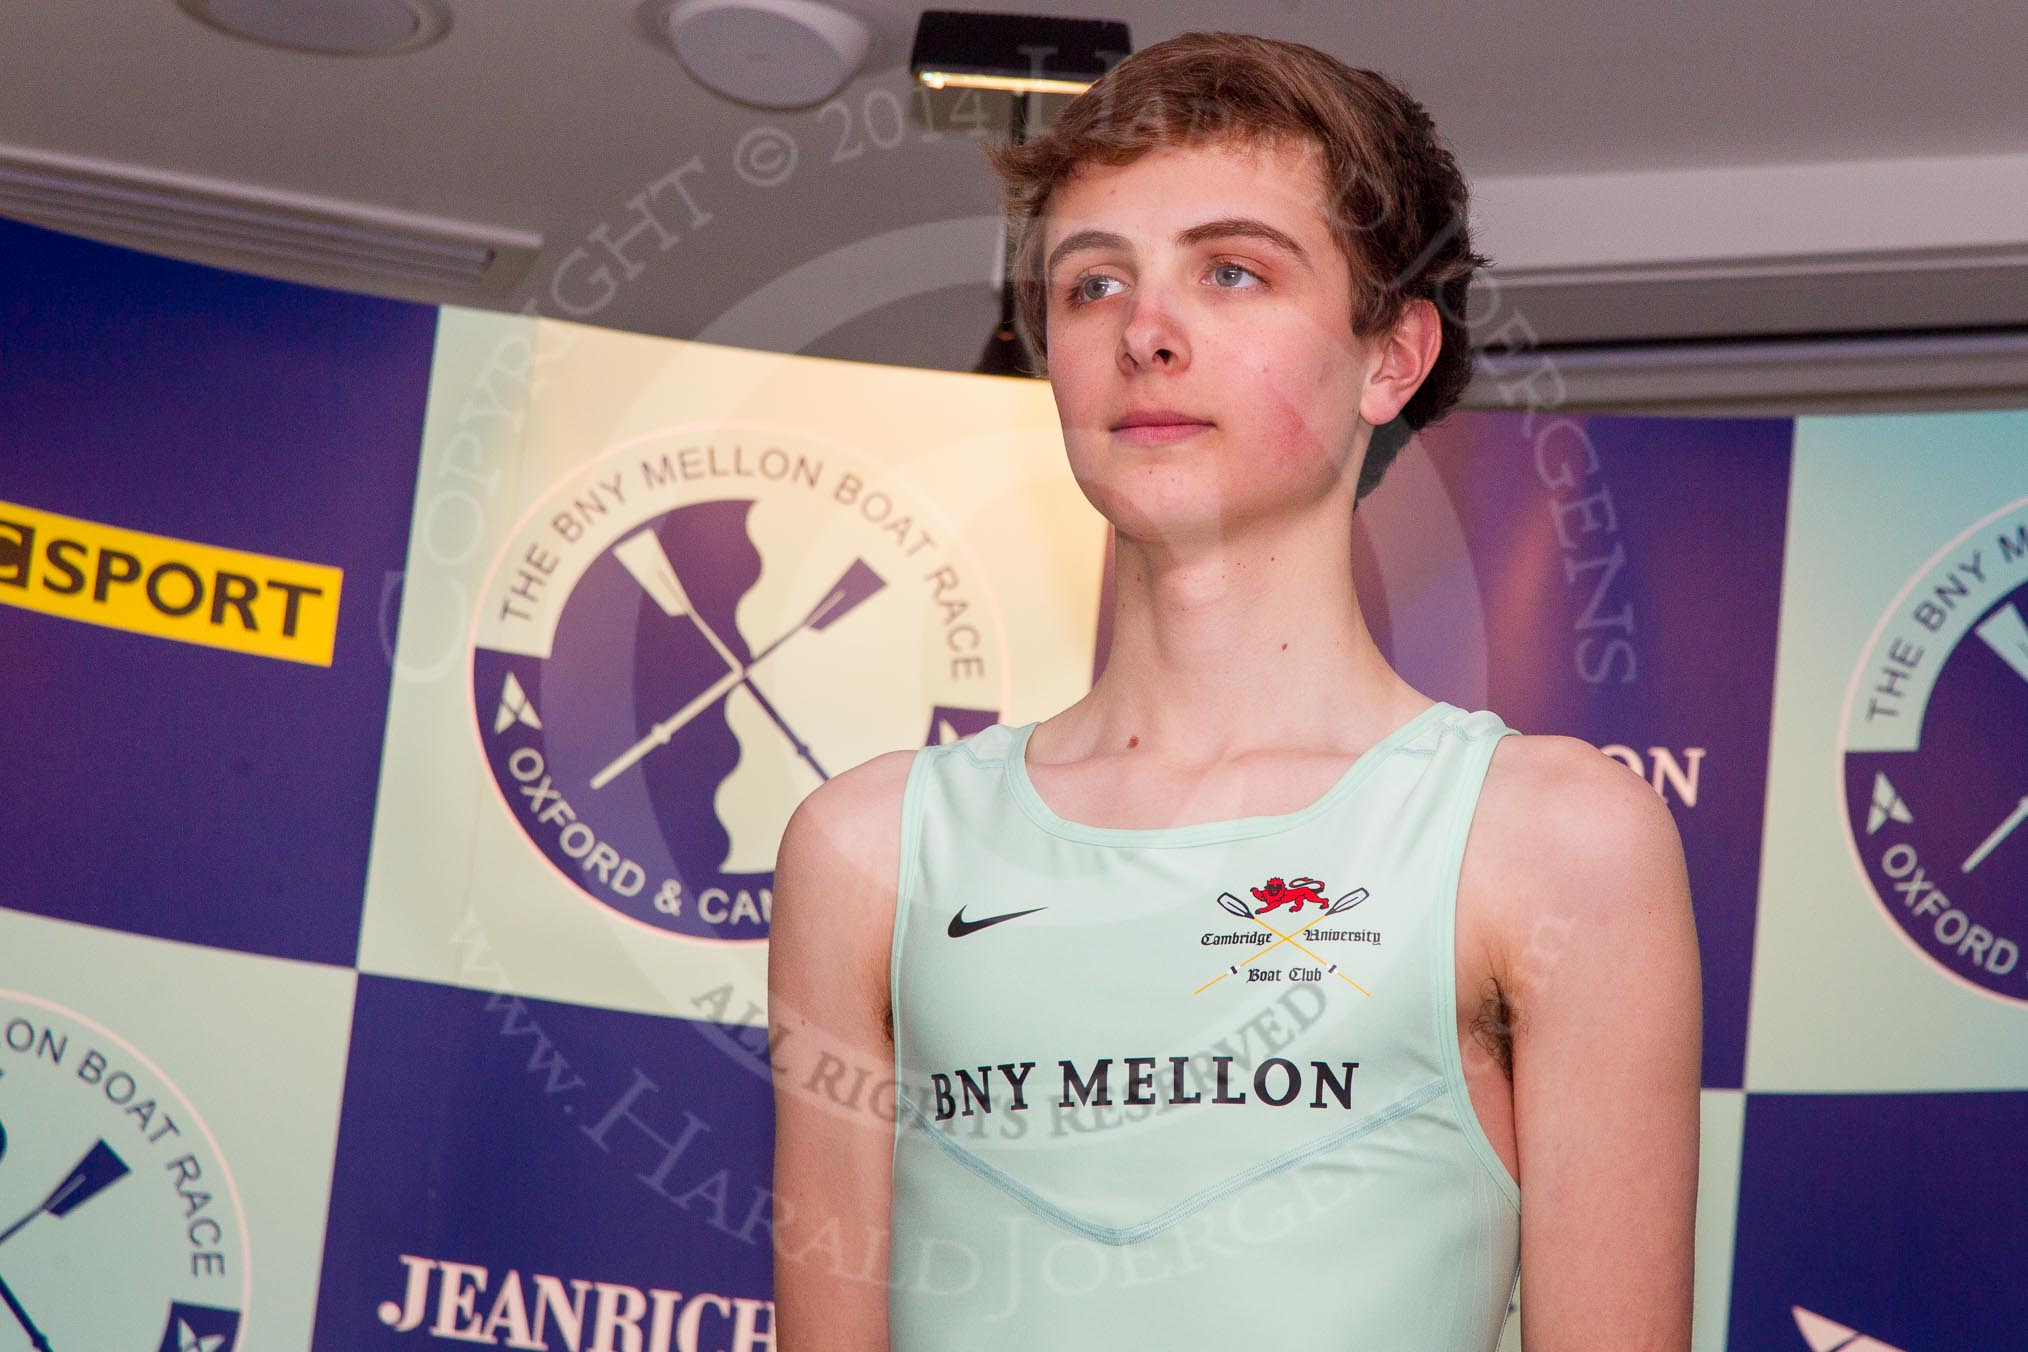 The Boat Race season 2014 - Crew Announcement and Weigh In: The 2014 Boat Race crews: Cambridge cox Ian Middleton - 53.6kg..
BNY Mellon Centre,
London EC4V 4LA,
London,
United Kingdom,
on 10 March 2014 at 12:06, image #118